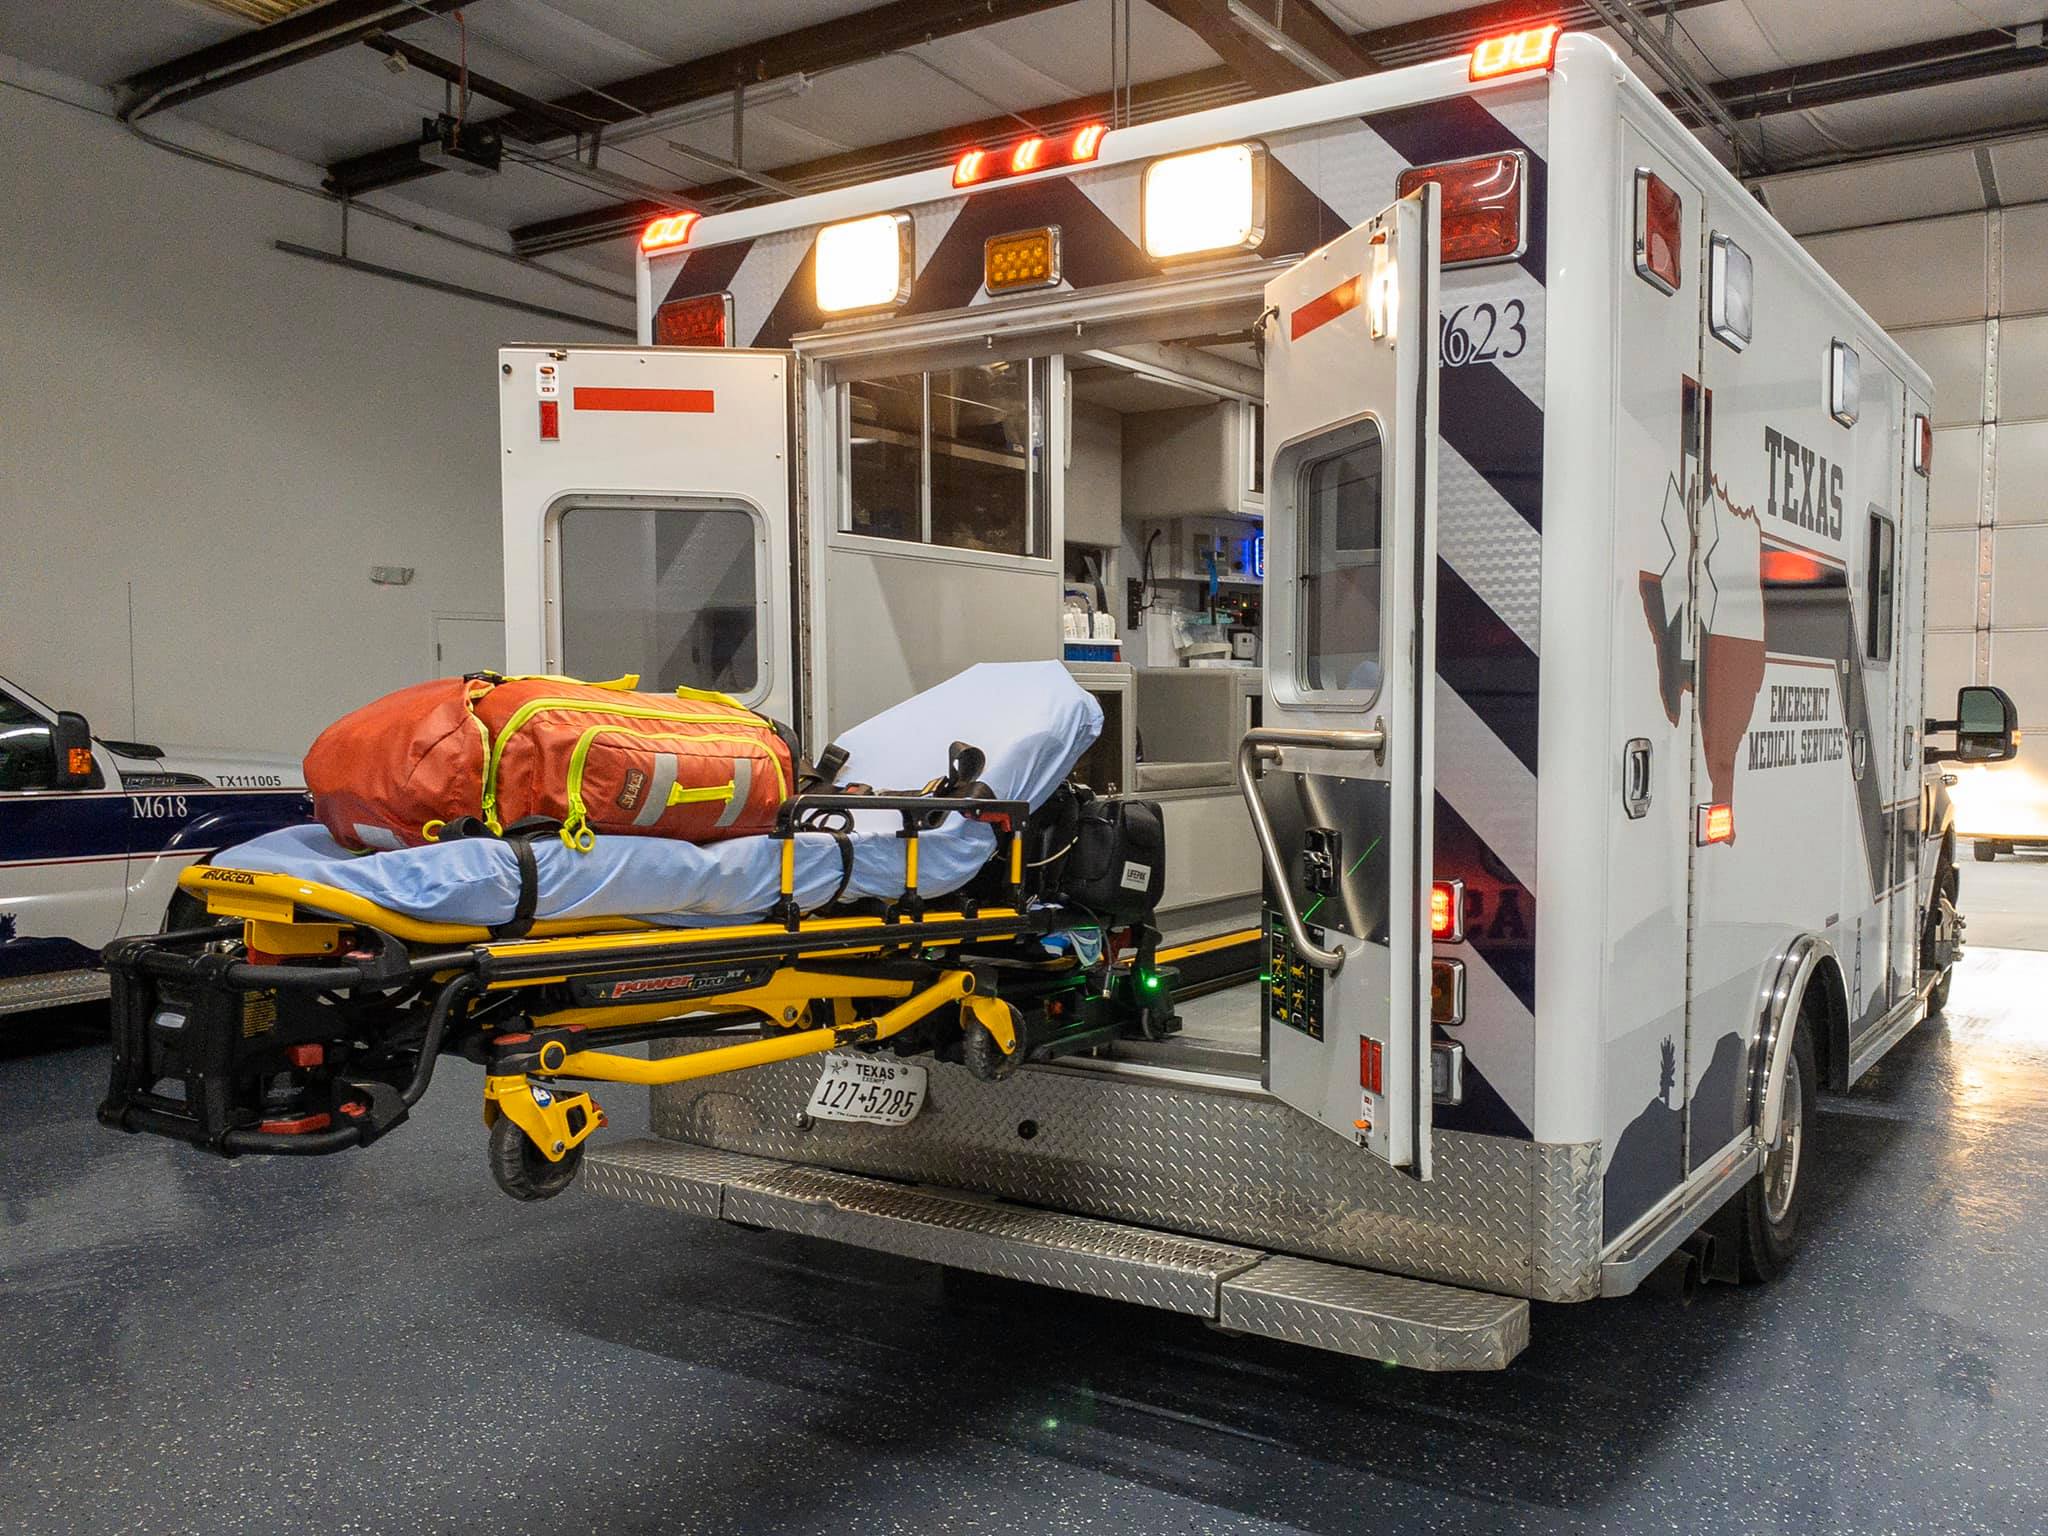 state of the art EMS care